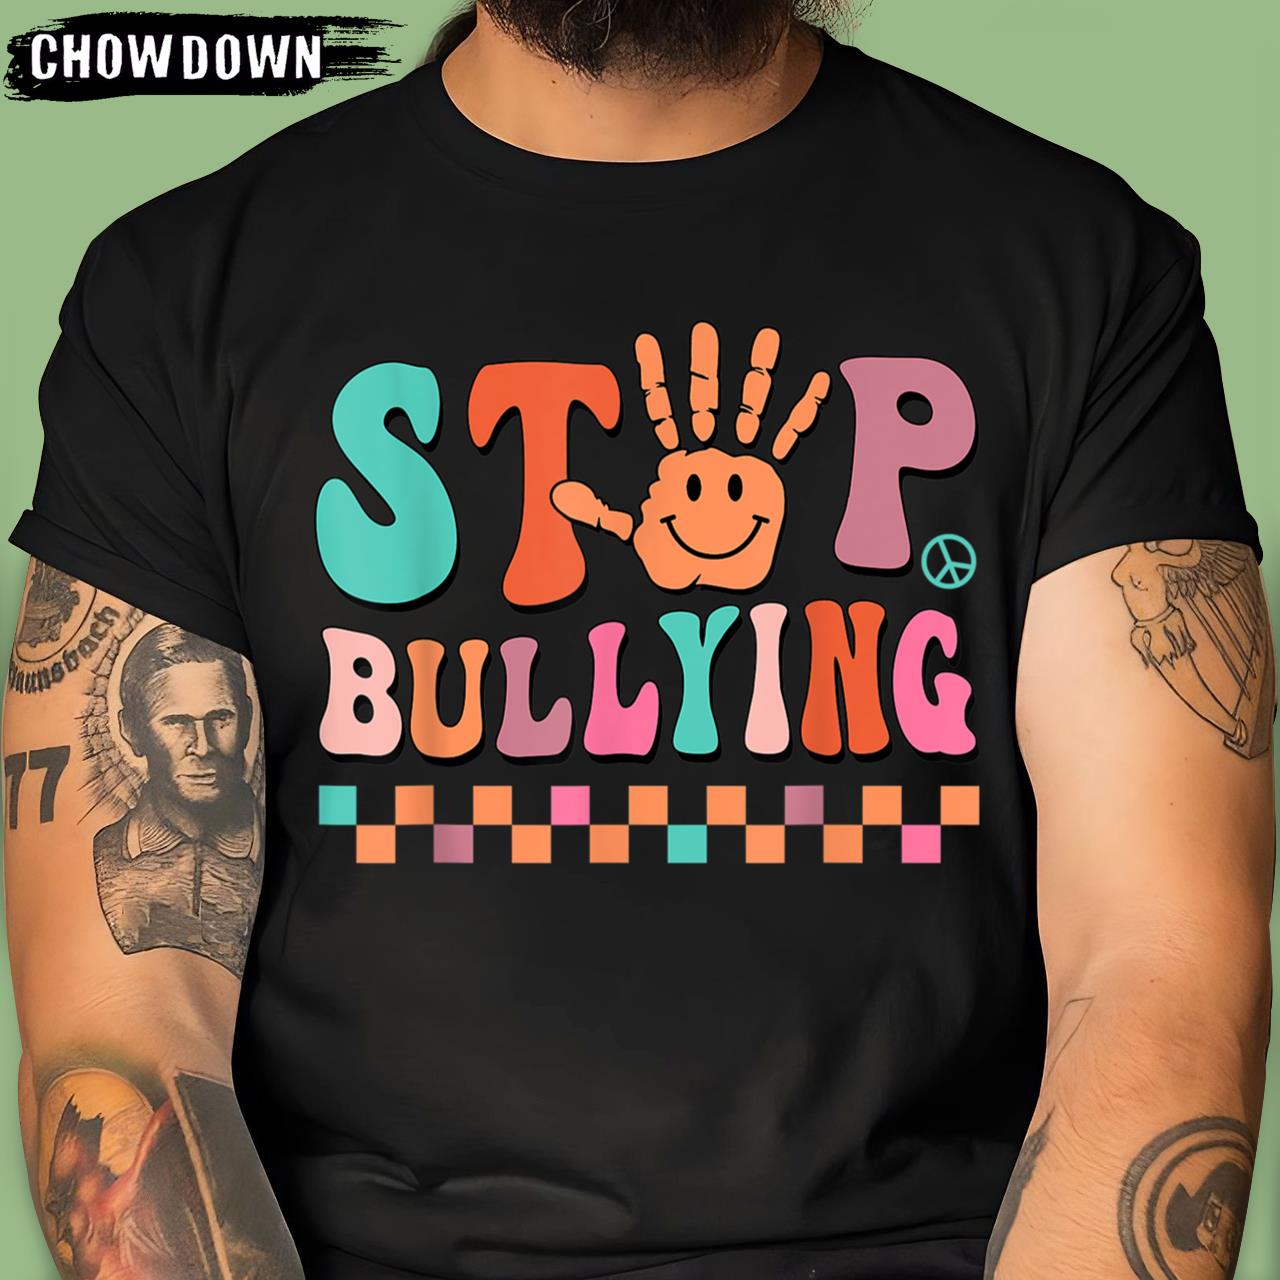 Groovy Unity Day Orange Tee Kid Stop Bullying Be Kind Hippie Anti Bullying T-Shirt